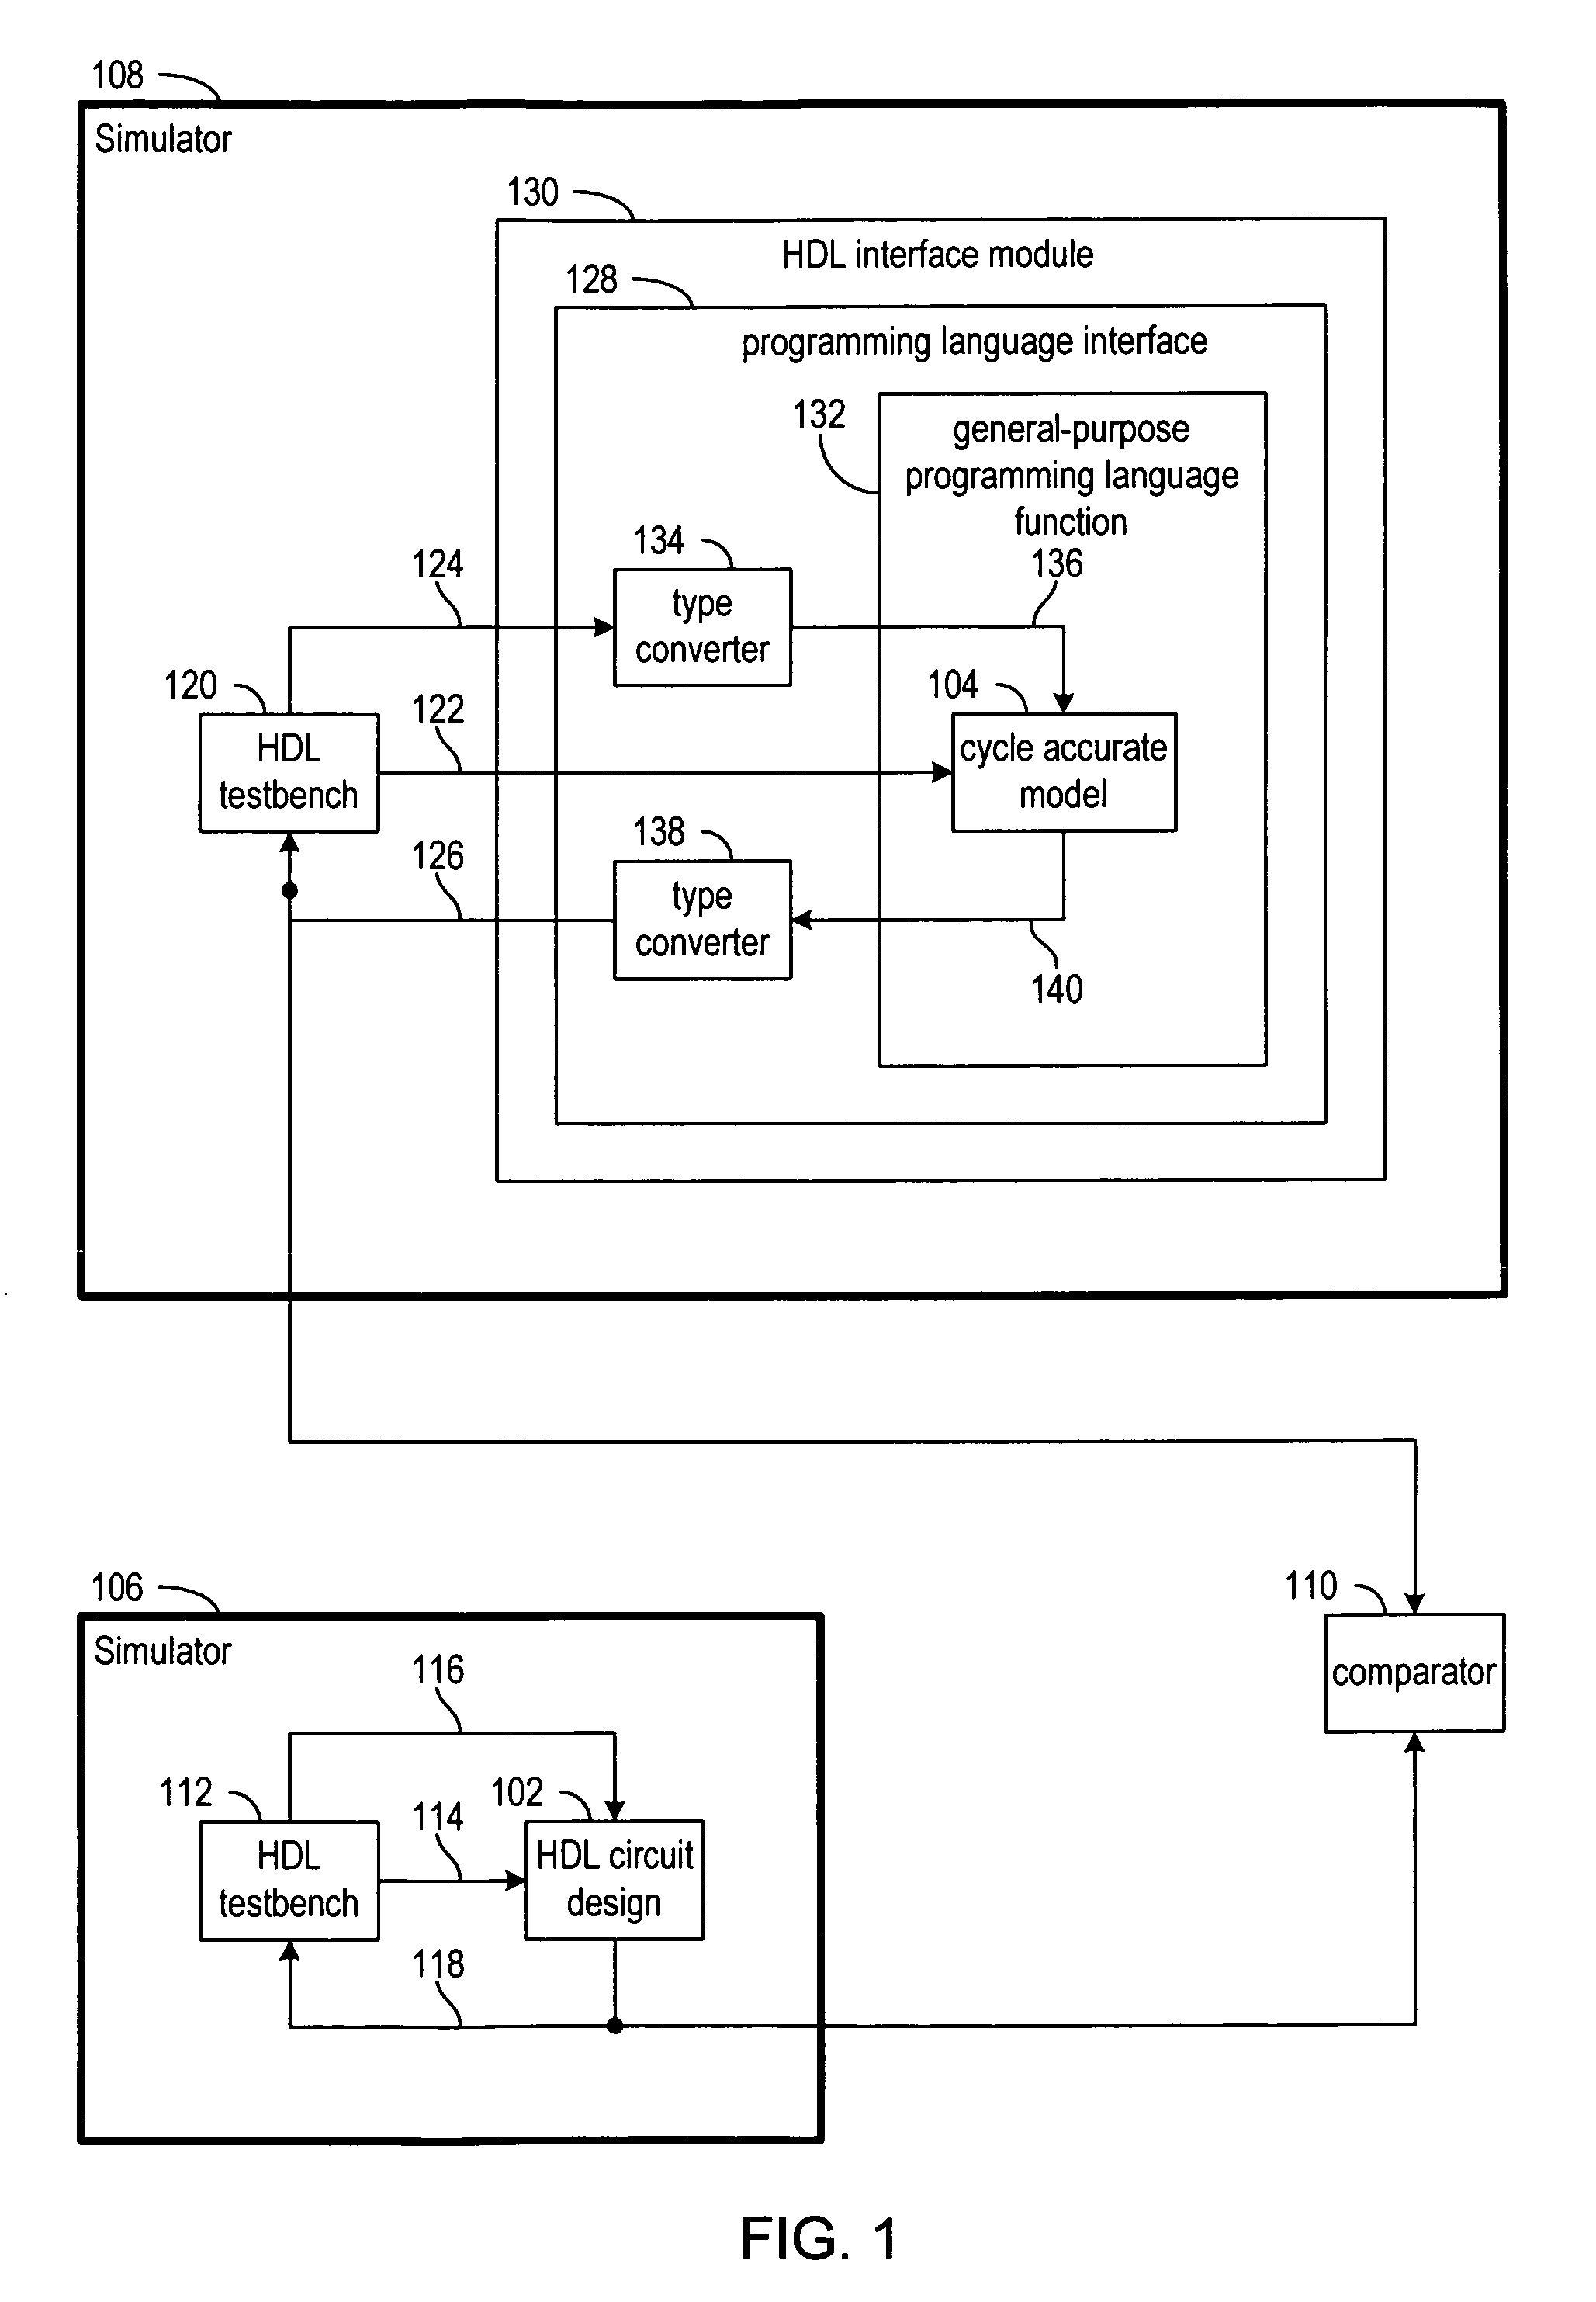 Simulation of a programming language specification of a circuit design